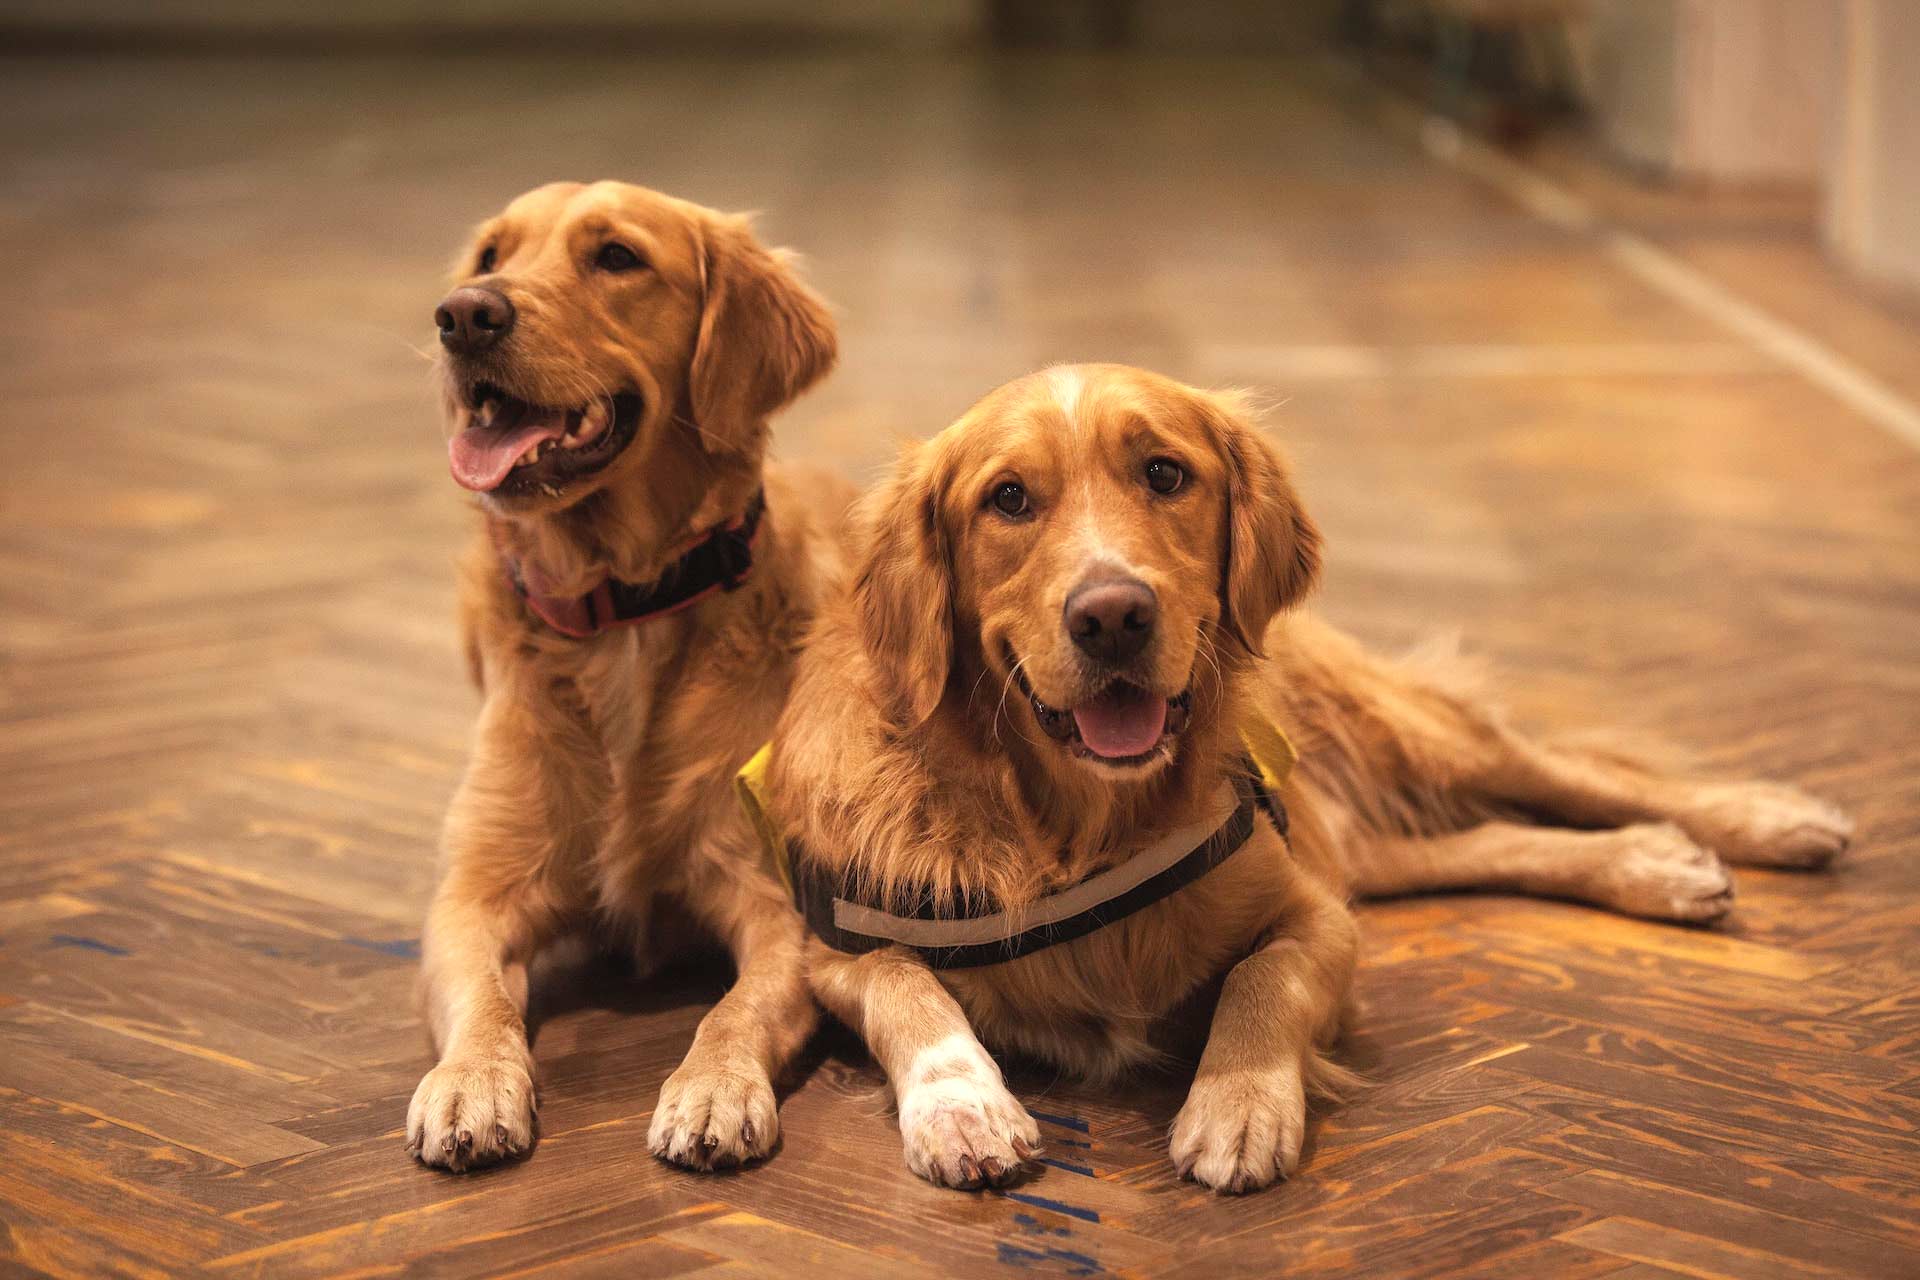 Two adult golden retrievers lie down on the floor